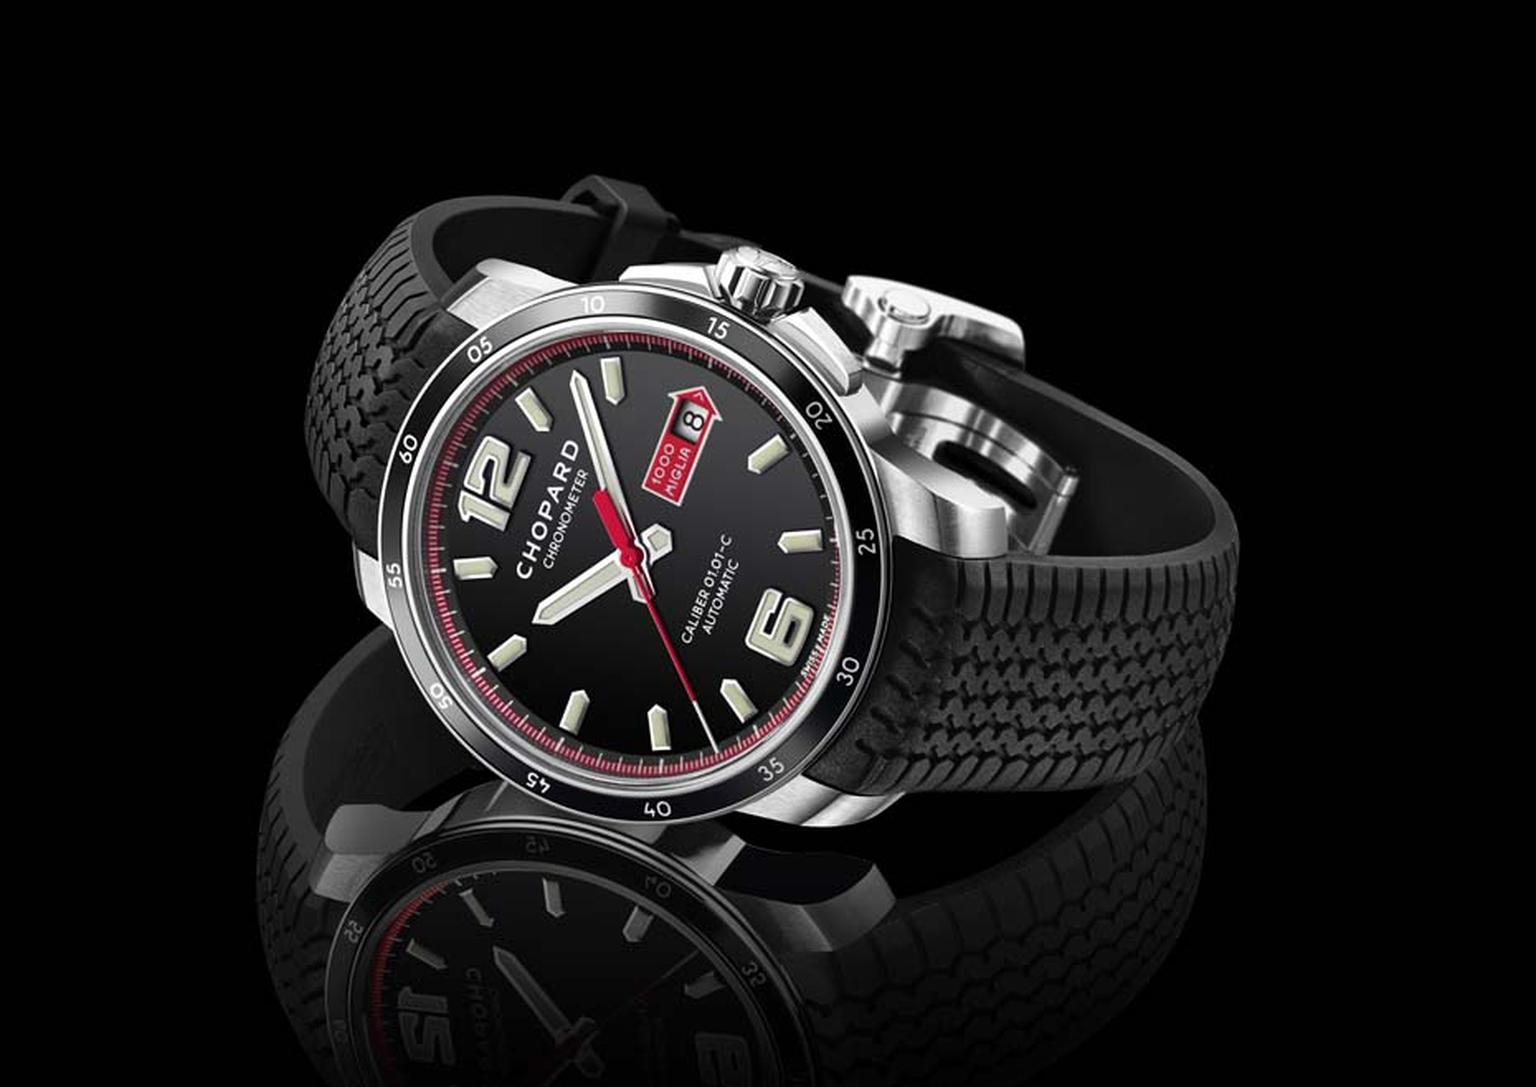 The new Chopard Mille Miglia GTS Automatic watch in a 43mm stainless steel case pays tribute to the aesthetics of vintage car dashboards with its black, red and white colour codes. The date window is framed by the red Mille Miglia arrow used to identify t